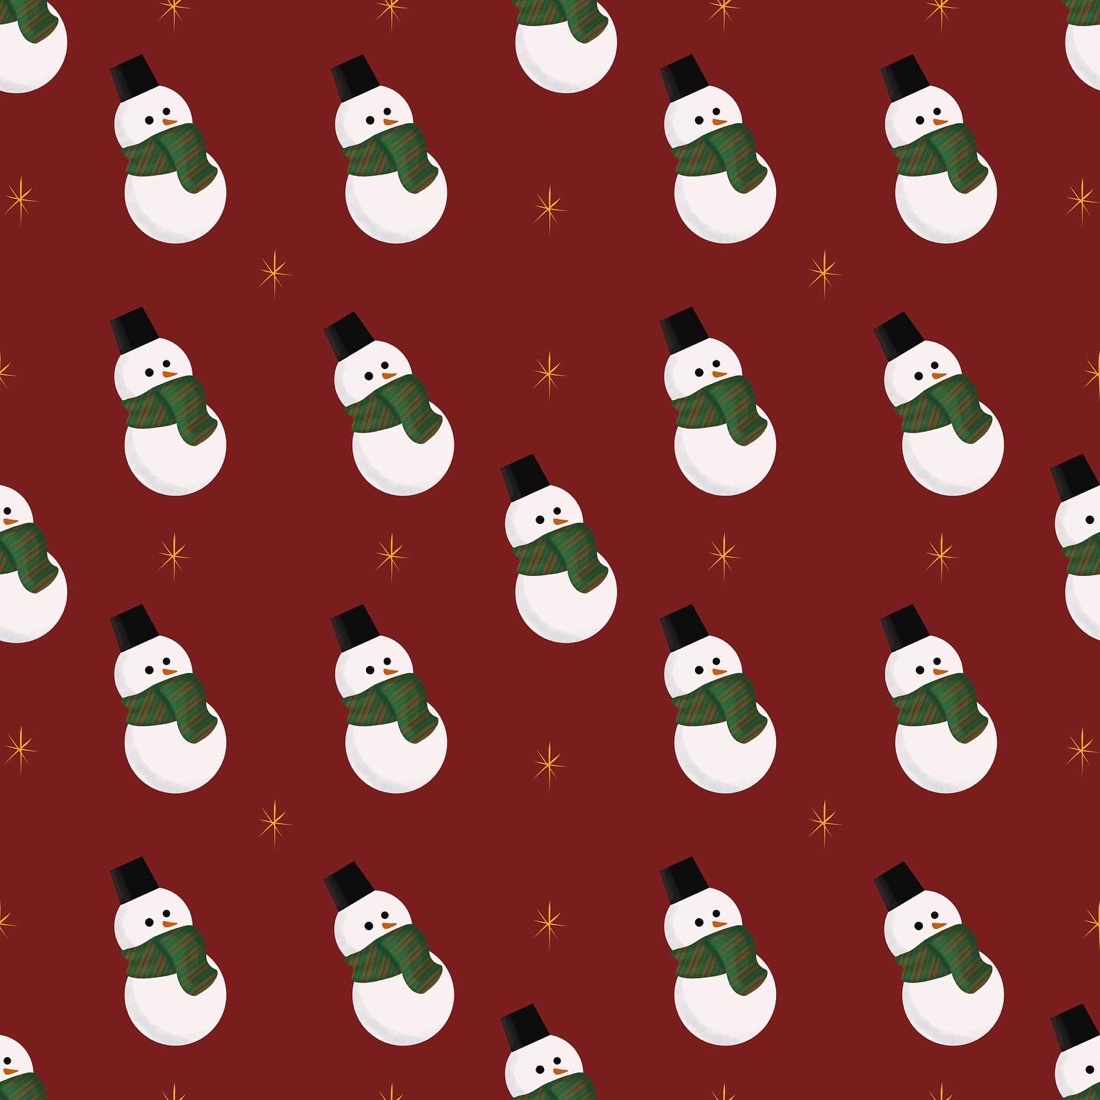 Snowman Christmas Patterns Design cover image.